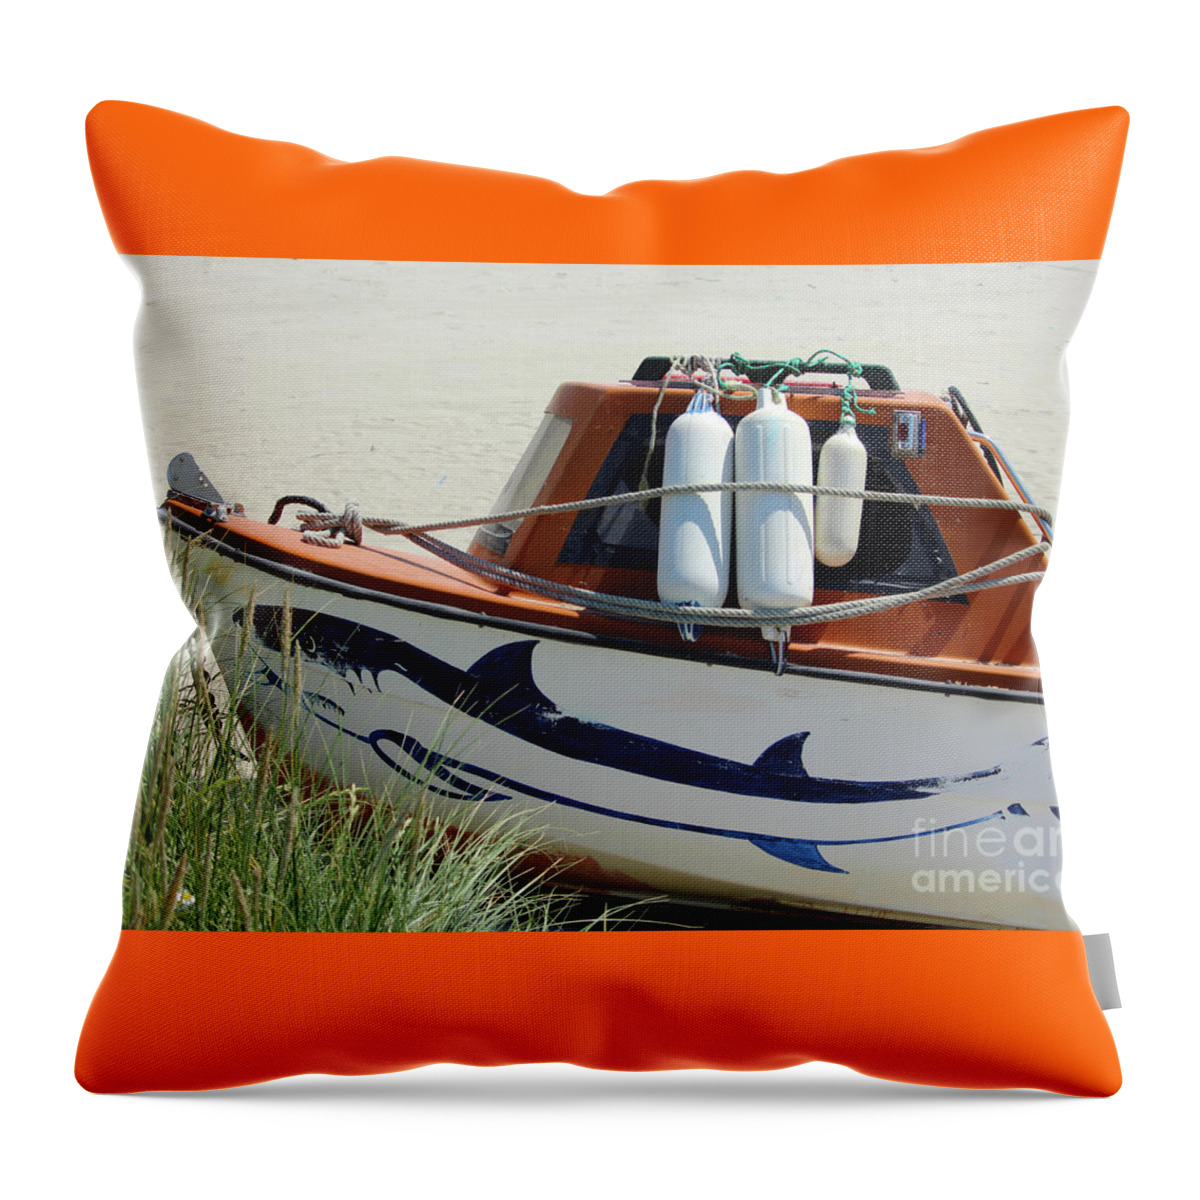 Sheephaven Bay Throw Pillow featuring the photograph Boat Shark Decoration Donegal Ireland by Eddie Barron